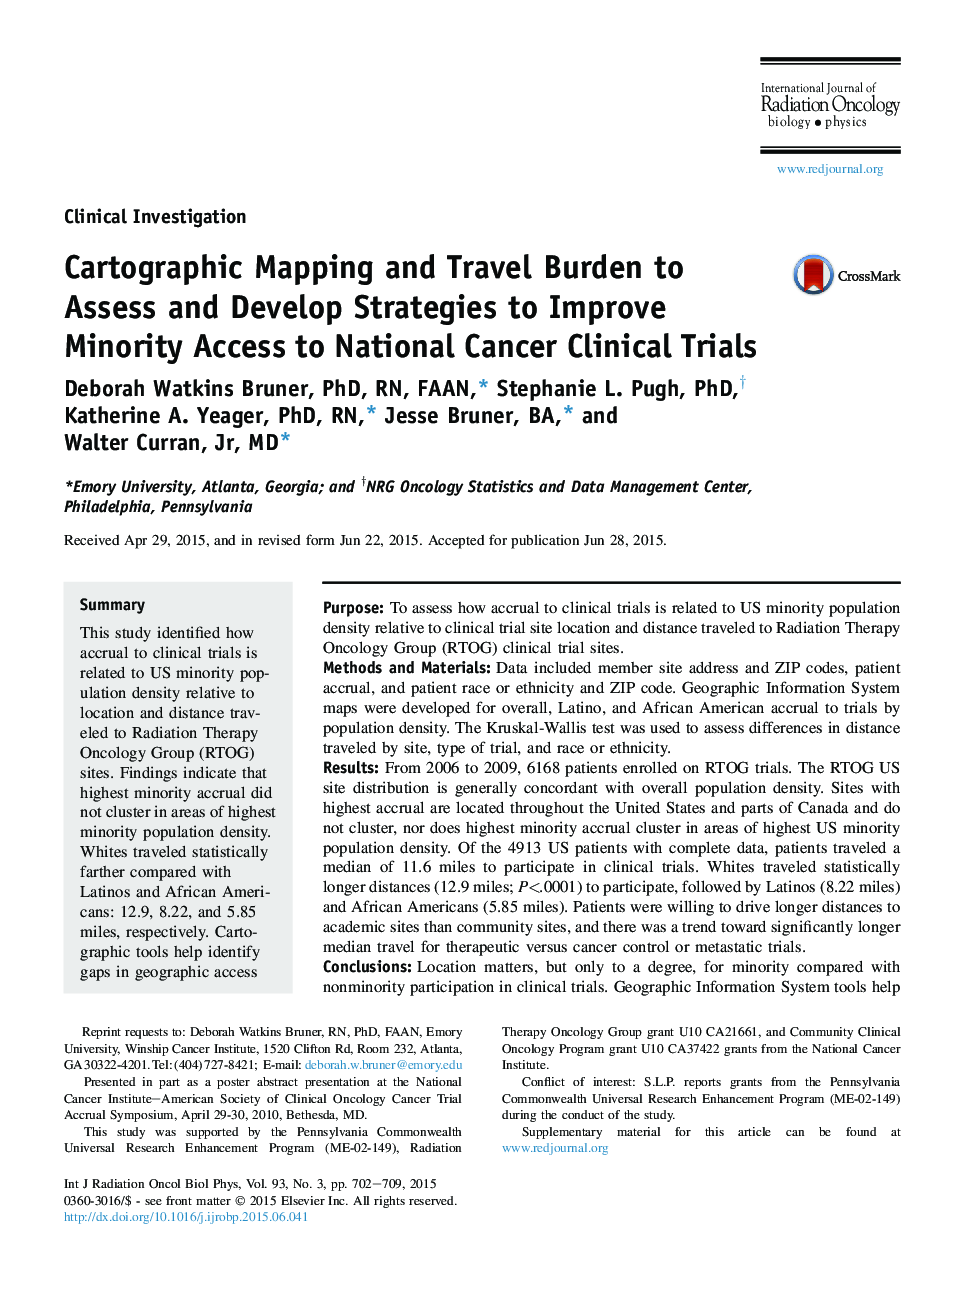 Cartographic Mapping and Travel Burden to Assess and Develop Strategies to Improve Minority Access to National Cancer Clinical Trials